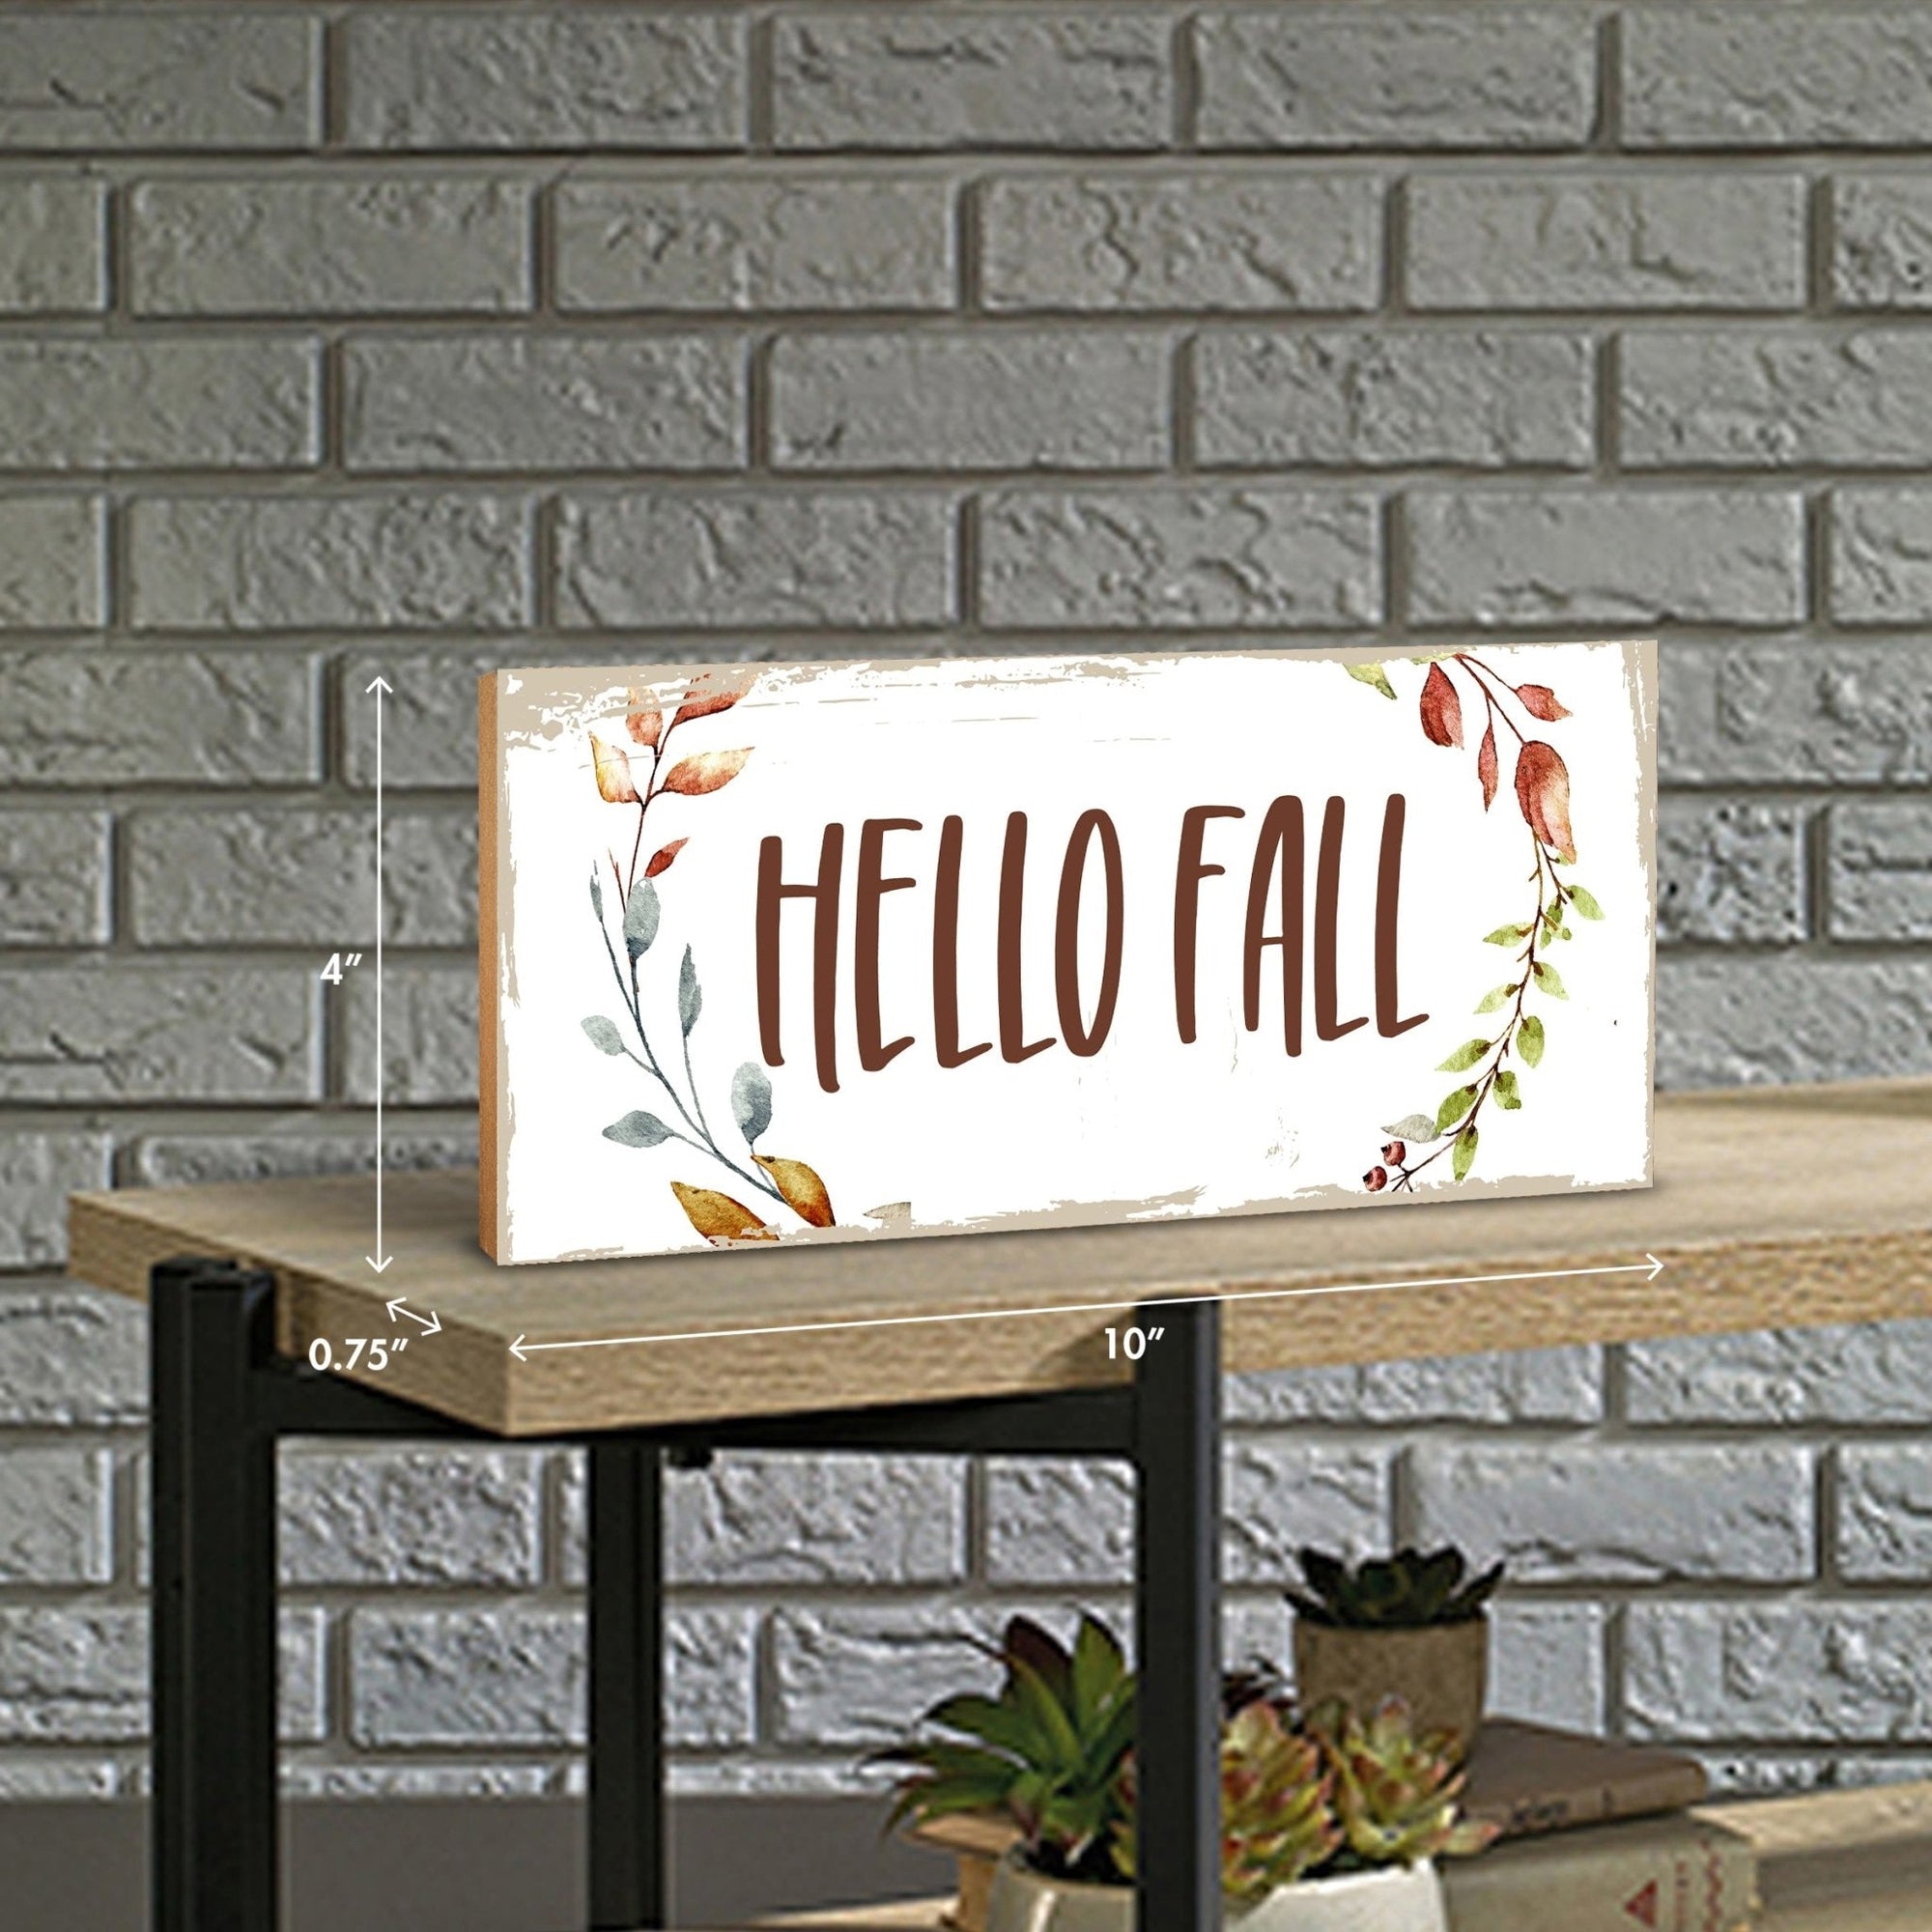 Inspirational Shelf Décor and Tabletop Signs for Fall Season - Hello Fall - LifeSong Milestones